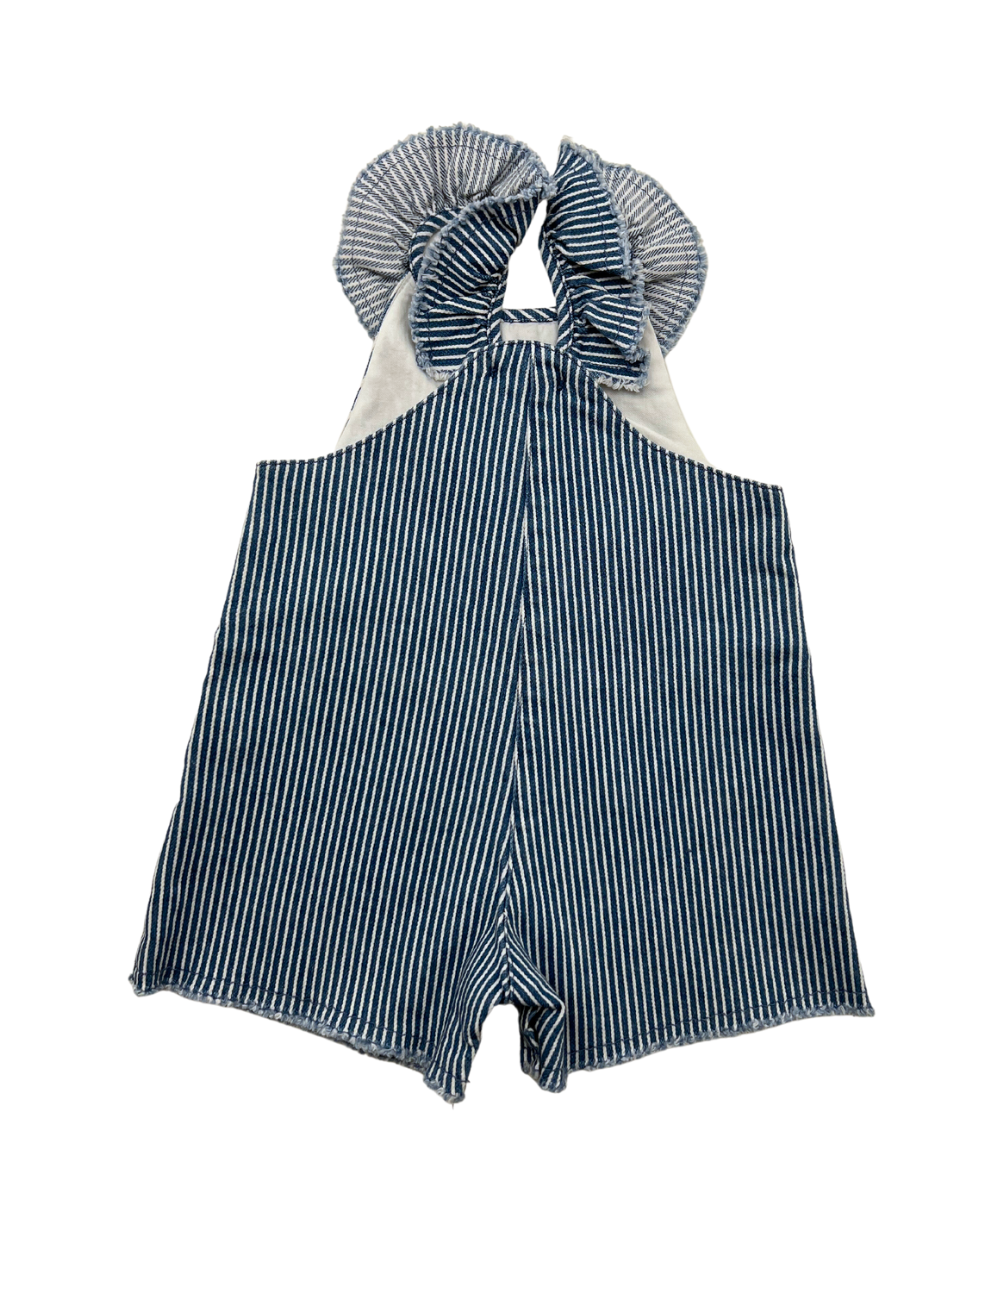 IL GUFO - Striped dungarees - 6 months